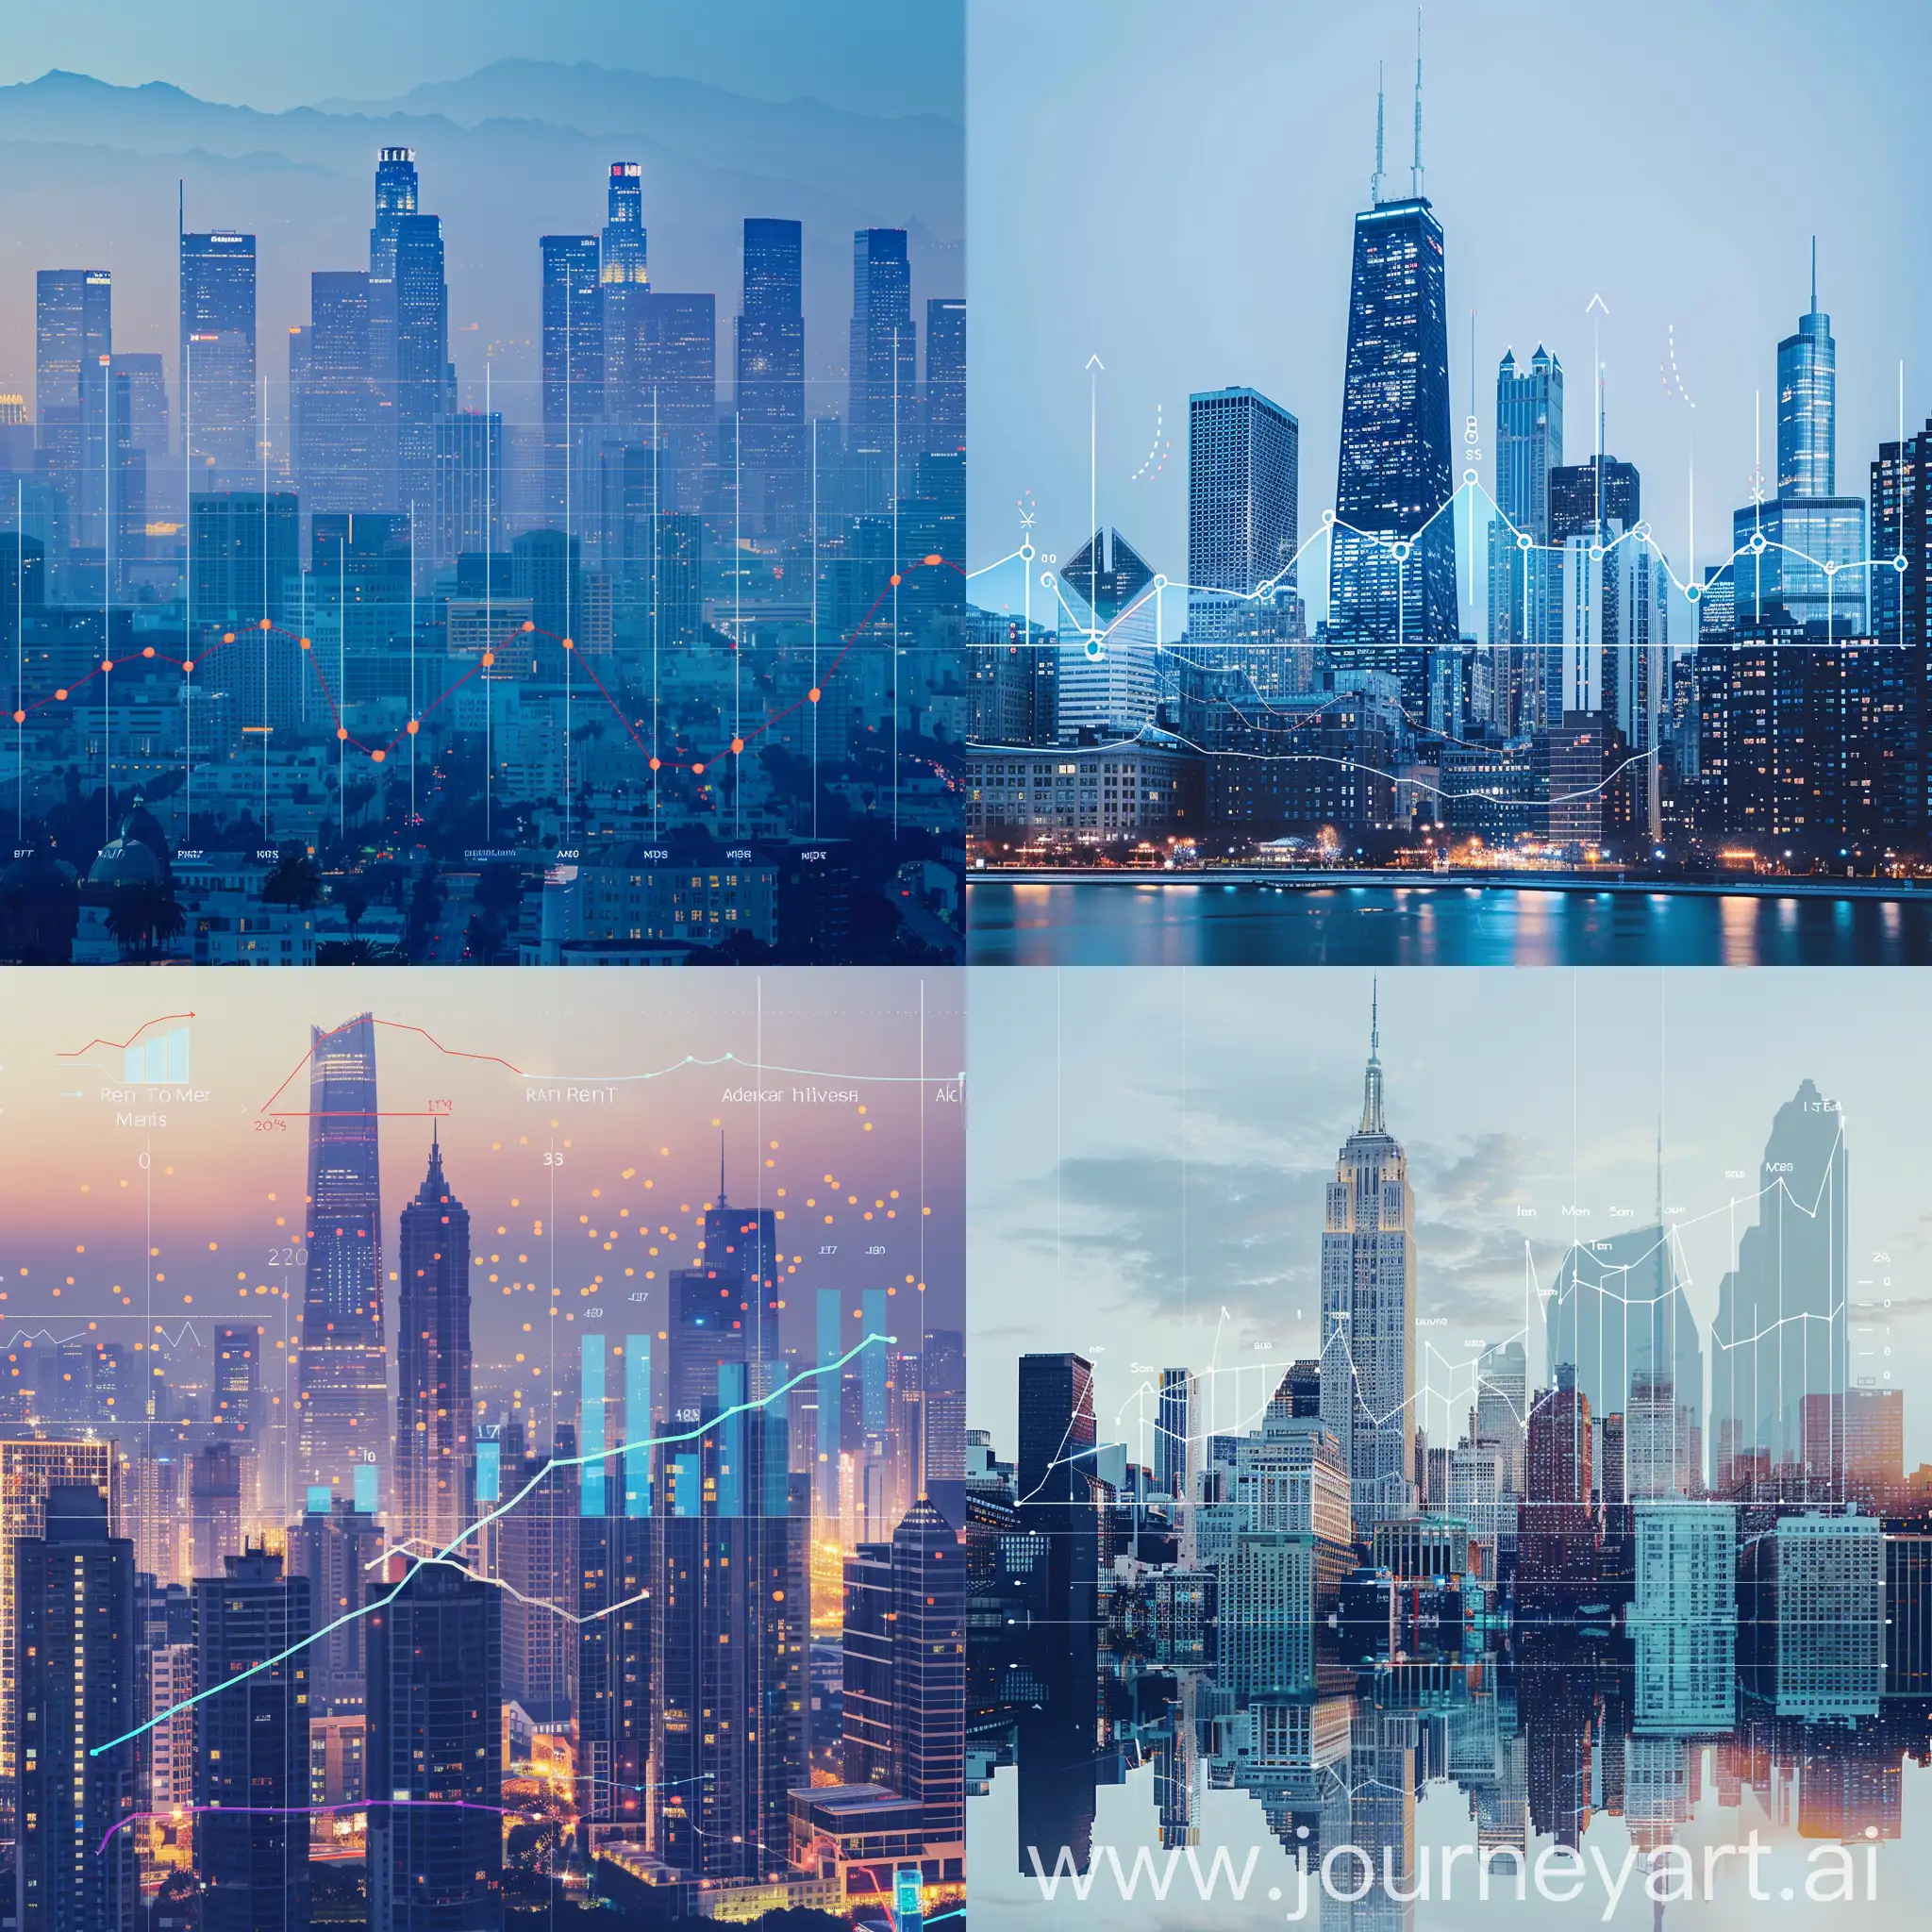 Urban-RenttoIncome-Ratios-Illustrated-City-Skyline-with-Graph-Overlay